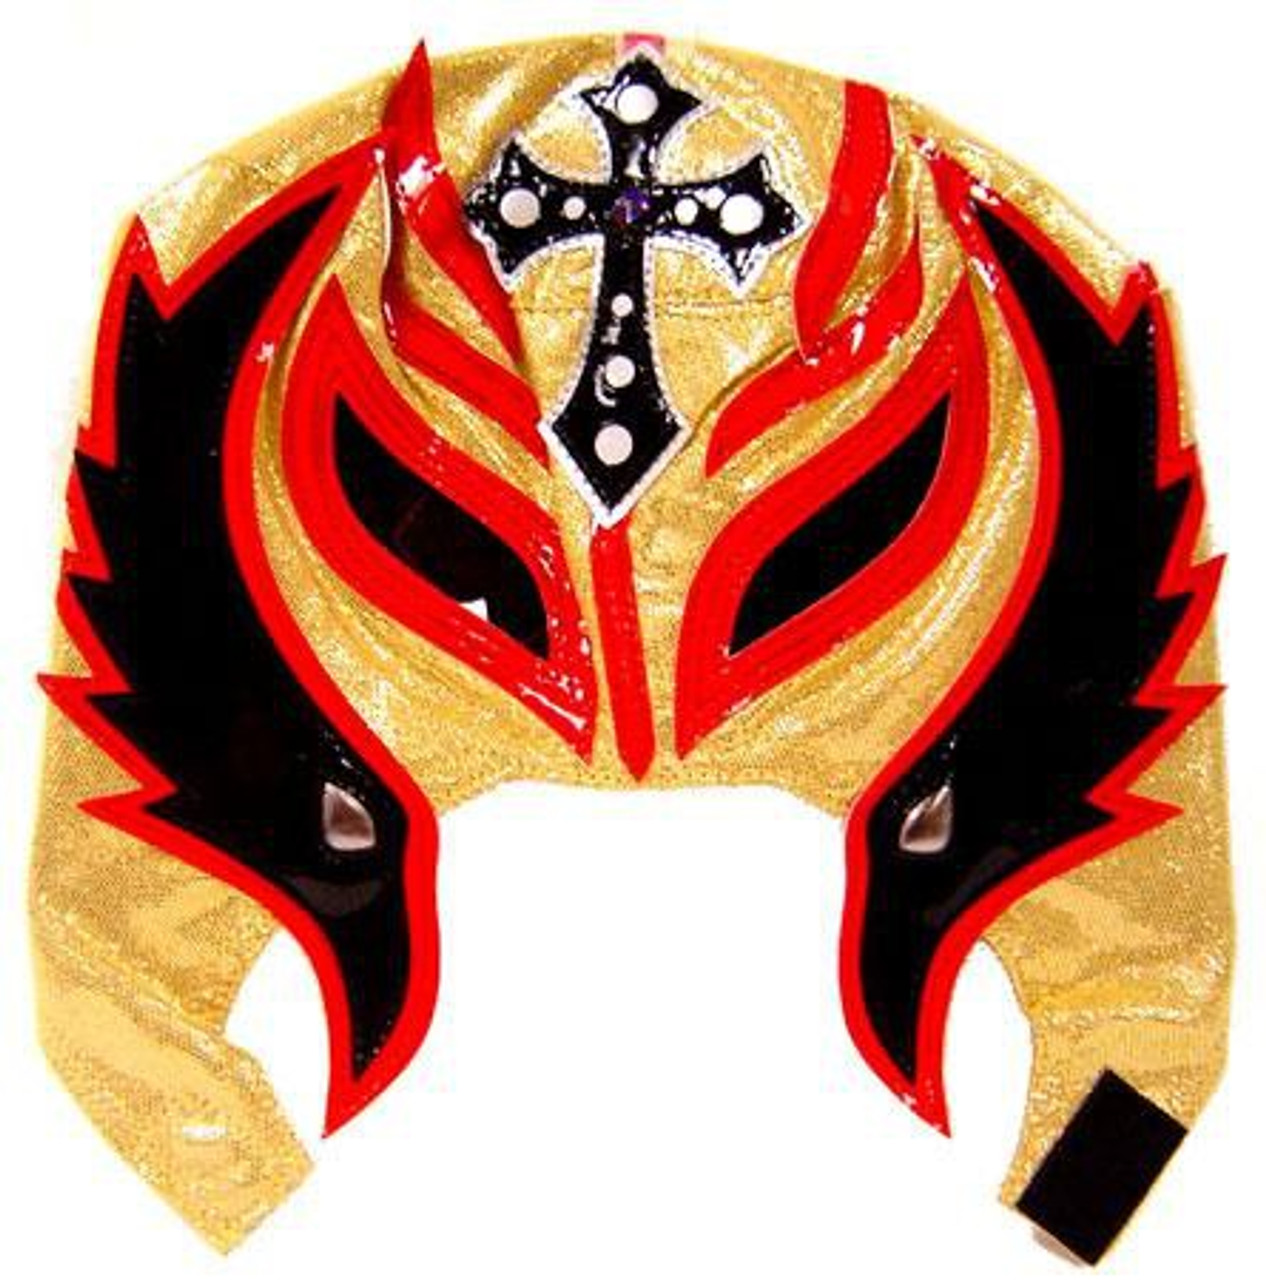 Wwe Wrestling Rey Mysterio Replica Mask Youth Black Red Gold Figures Toy Co Toywiz